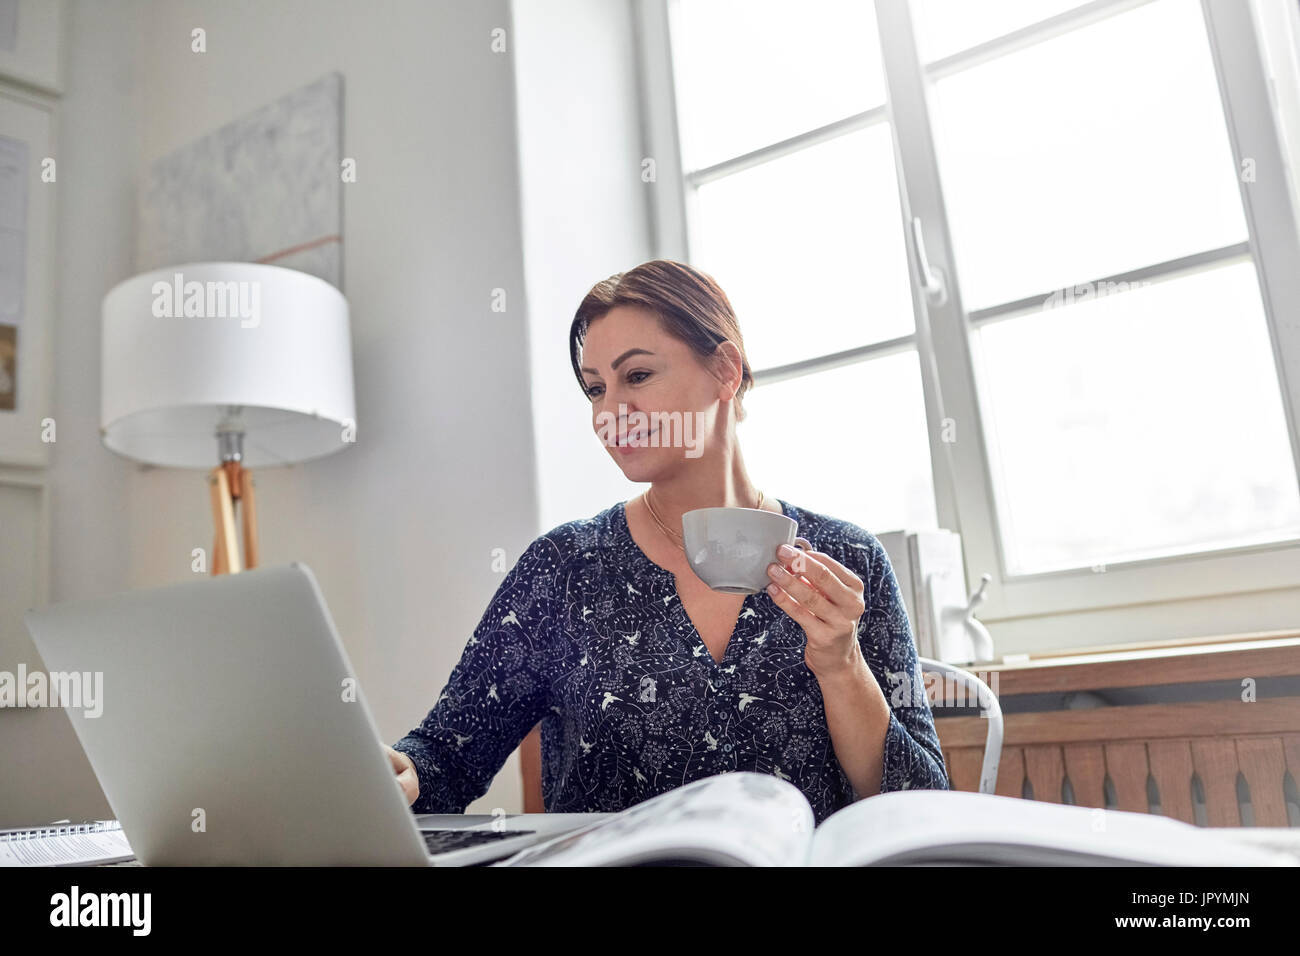 Smiling businesswoman drinking coffee and working at laptop Banque D'Images